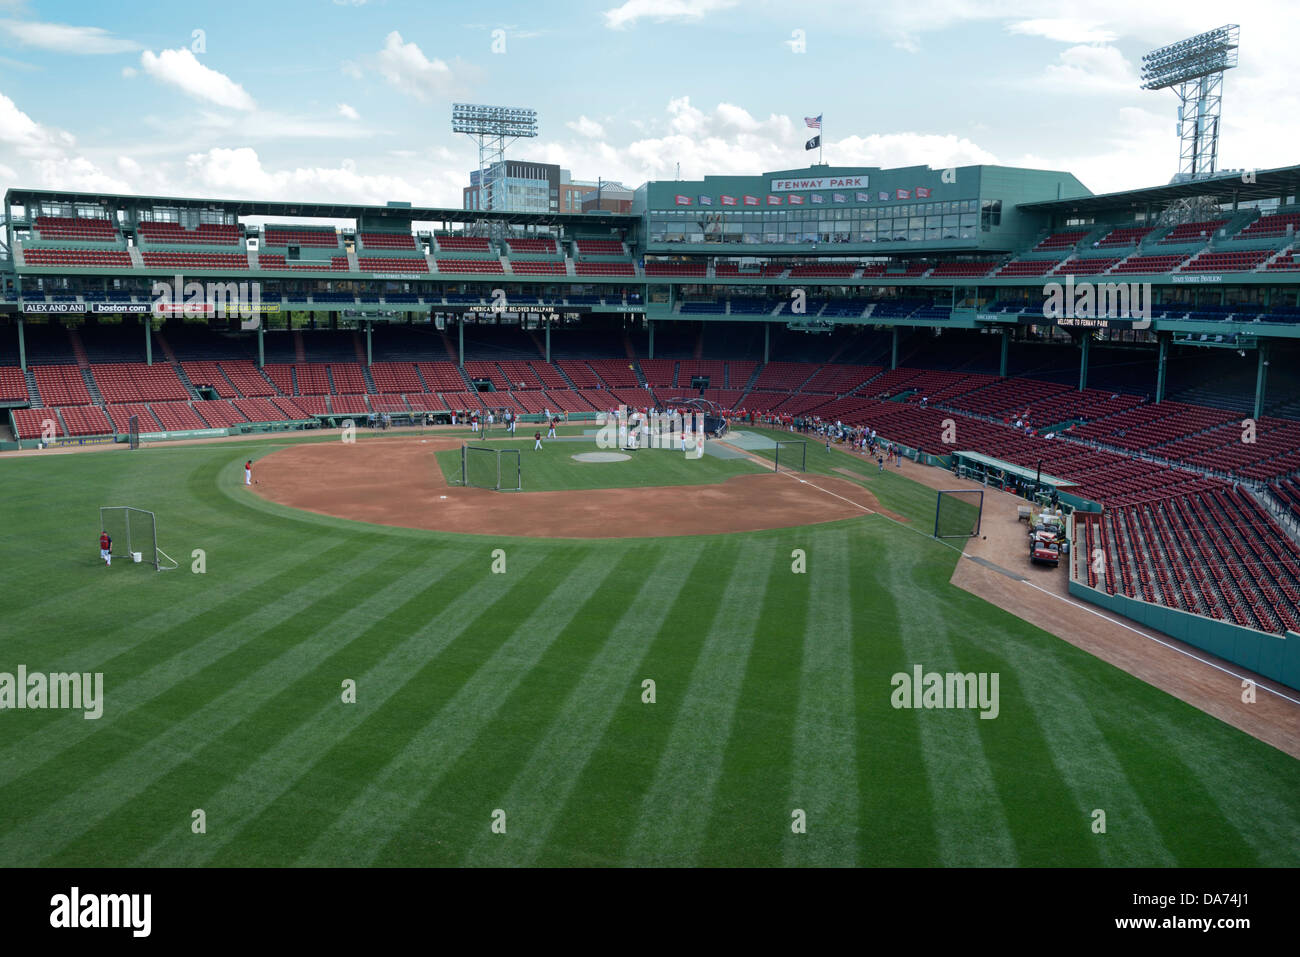 Fenway Park, Boston Massachusetts, home field of the Boston Red Sox, during batting practice before a game Stock Photo